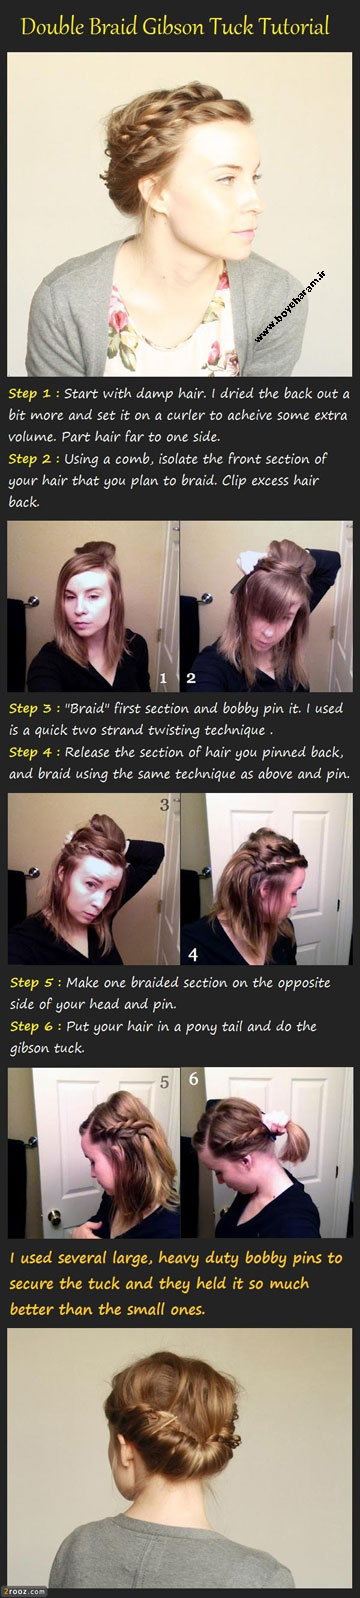 Styling-a-Bun-With-No-Elastic